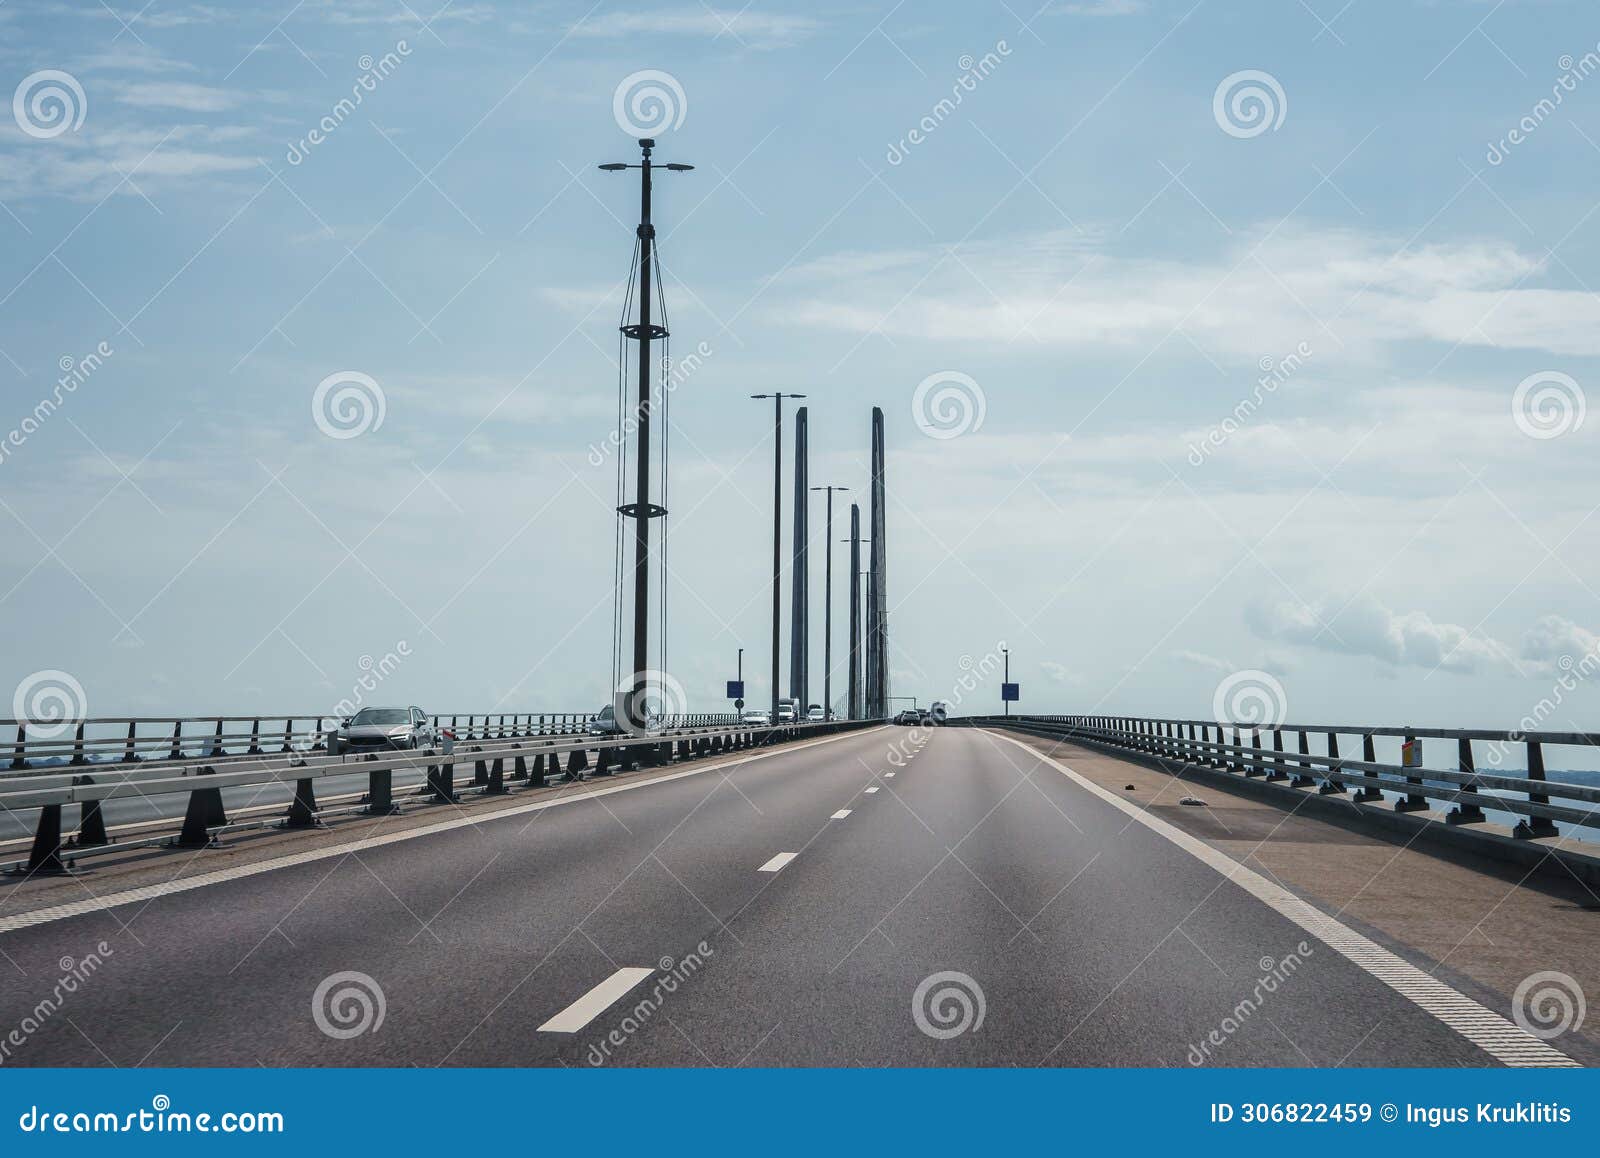 experience the modern oresund bridge with a clear sky and serene sea view.